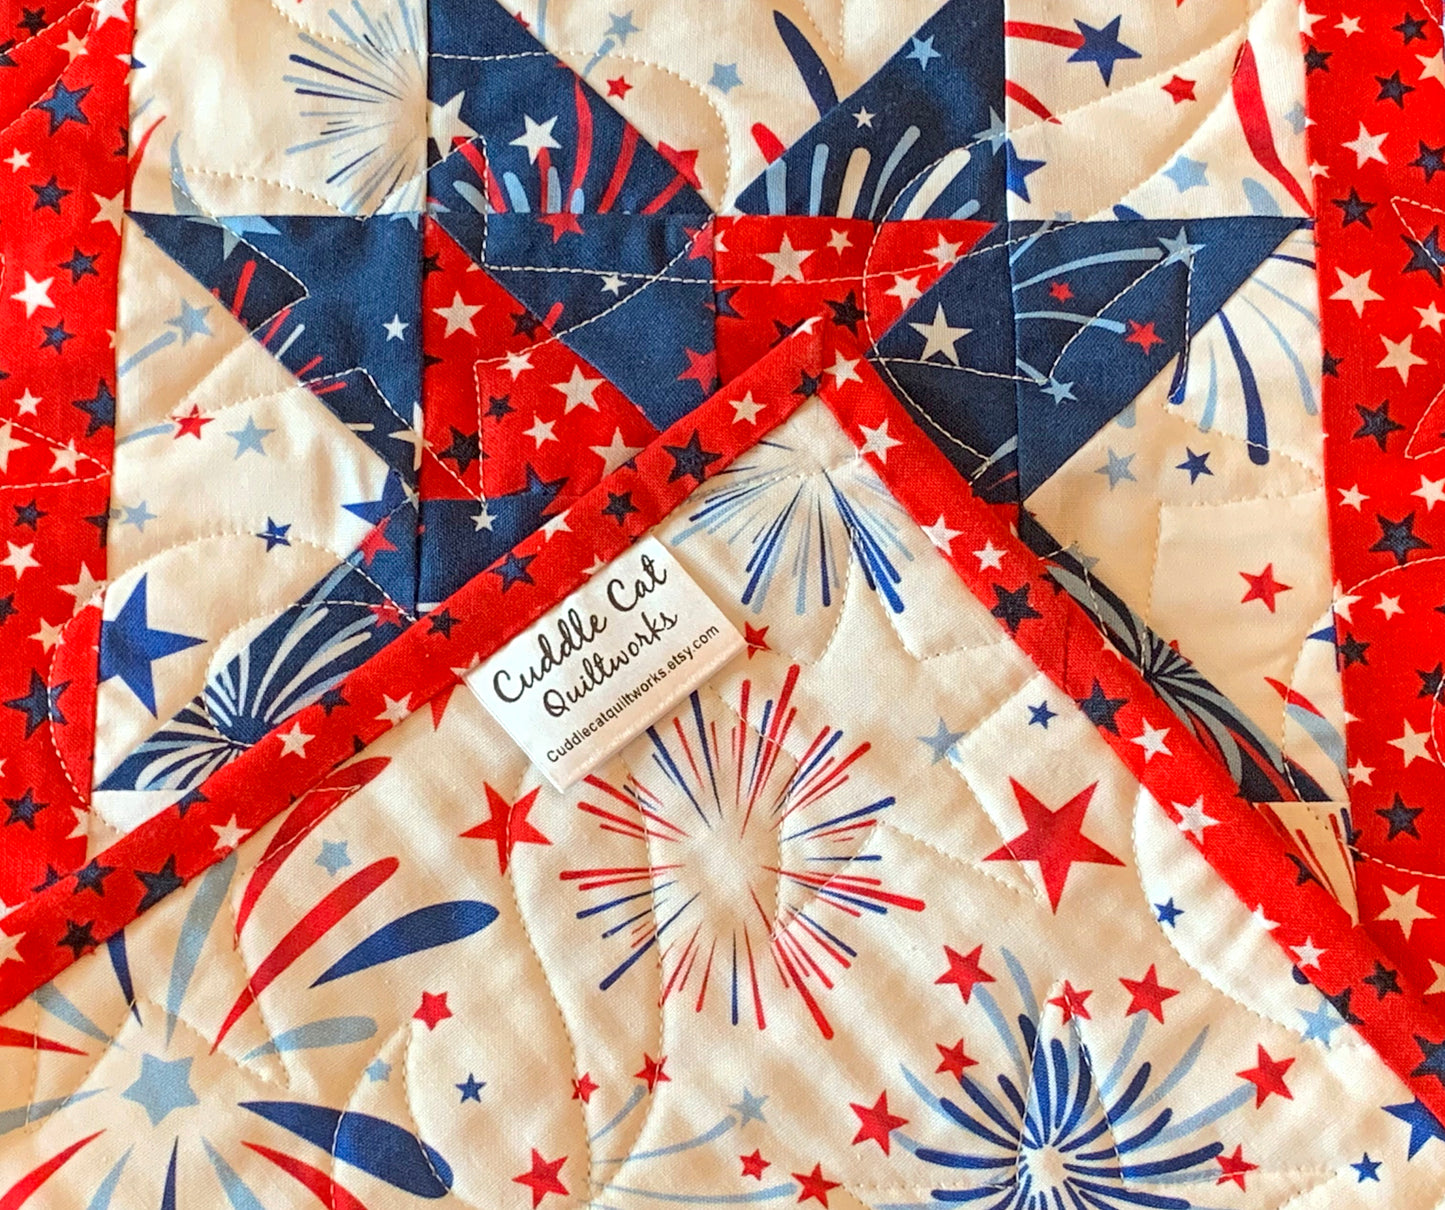 Close up of corner label on Red white and blue patriotic table runner with four center star blocks that have a pinwheel in the center. The runner has red star sashing between the blocks and a blue fireworks border. 